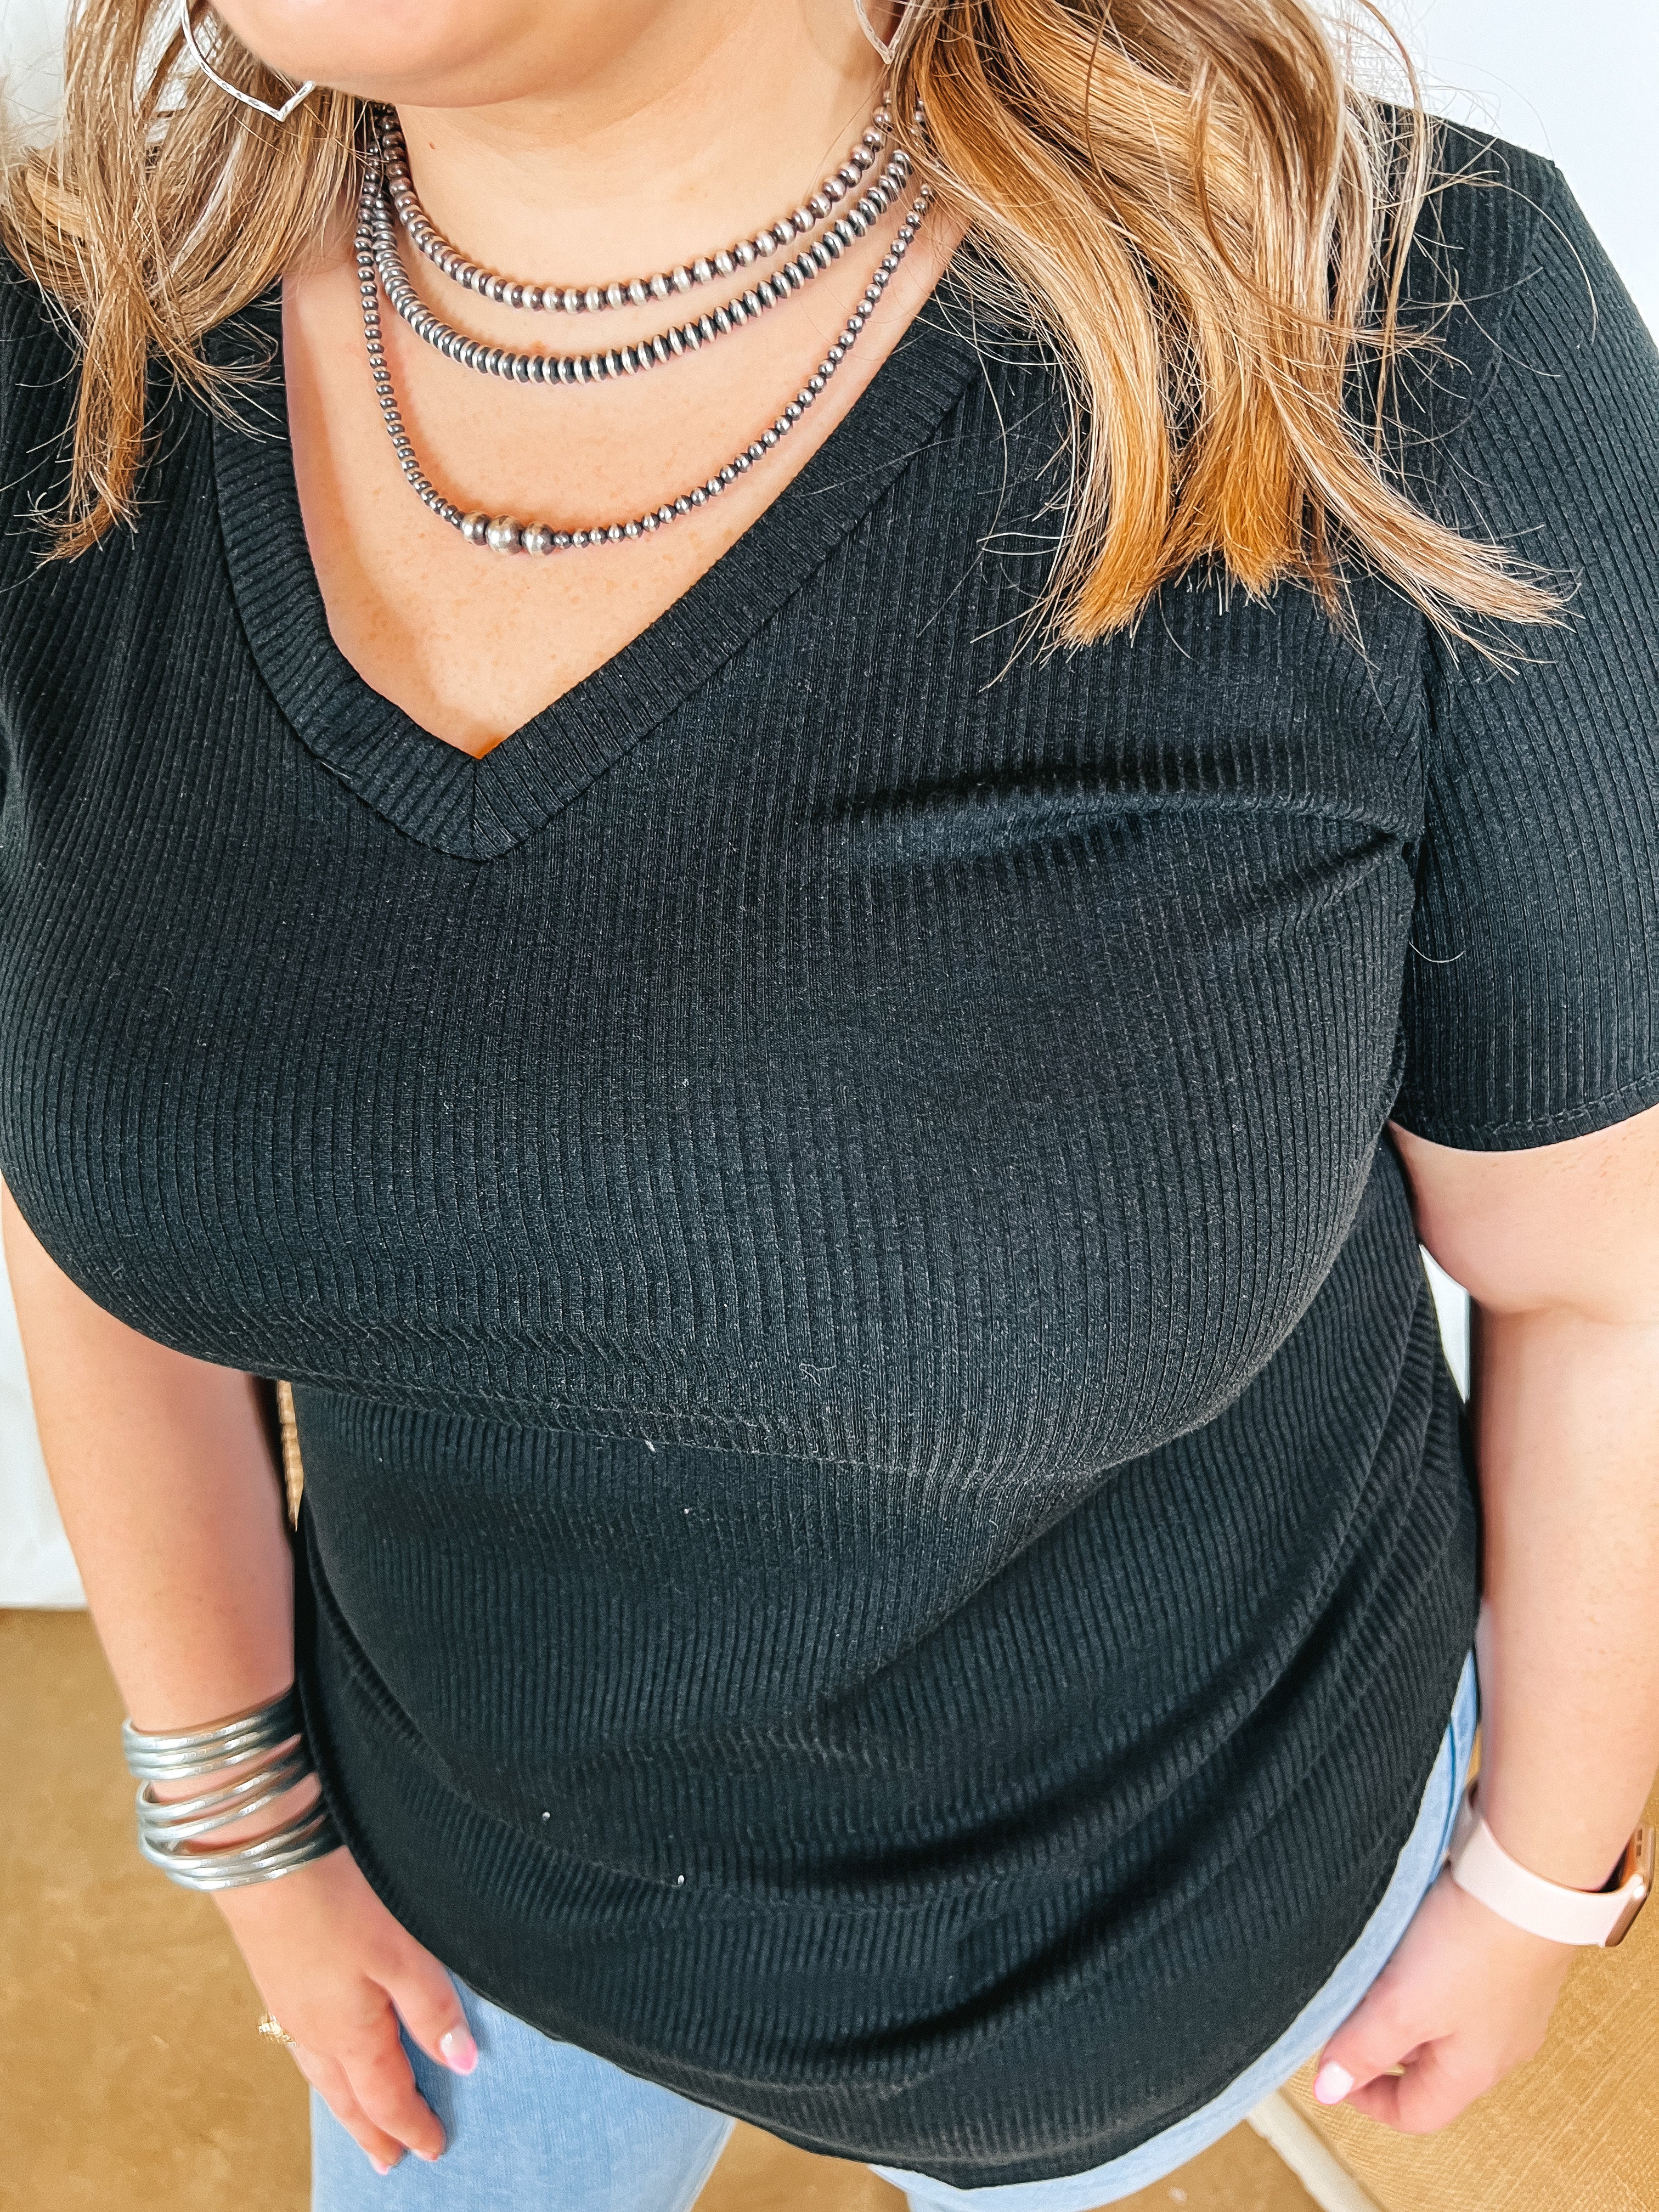 Simply Obsessed Ribbed Short Sleeve V Neck Top in Black - Giddy Up Glamour Boutique